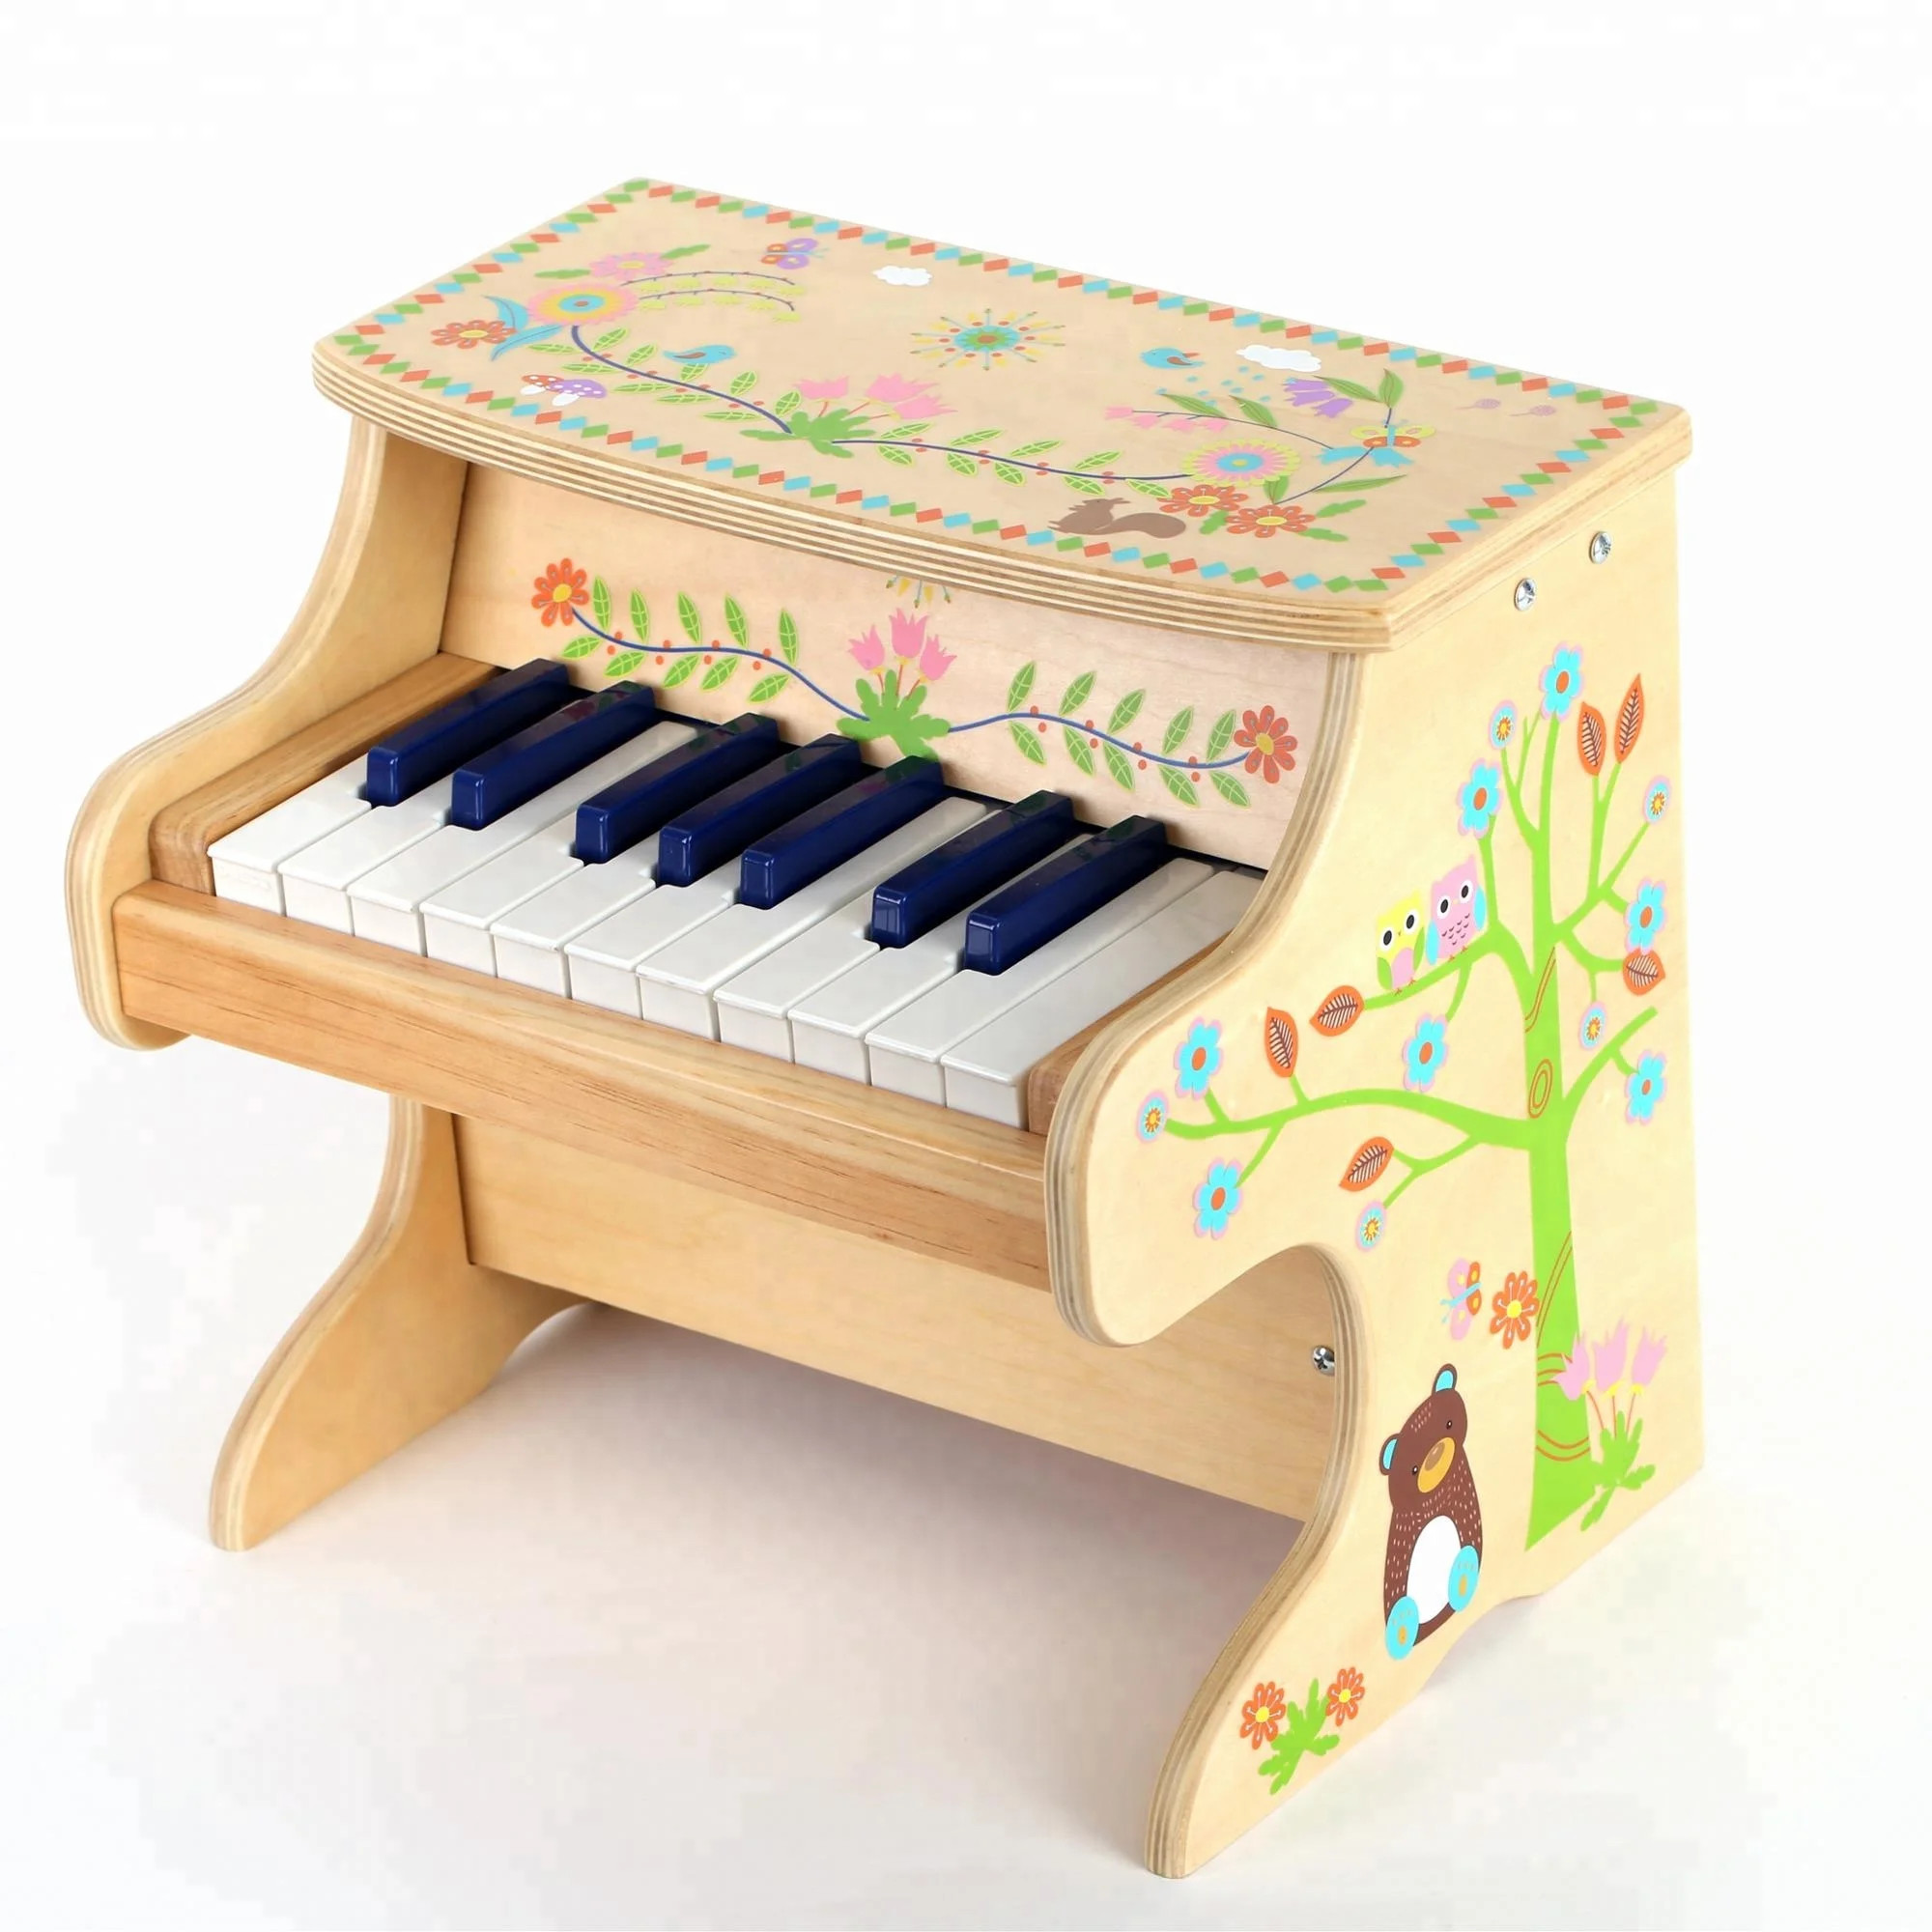 little toy piano